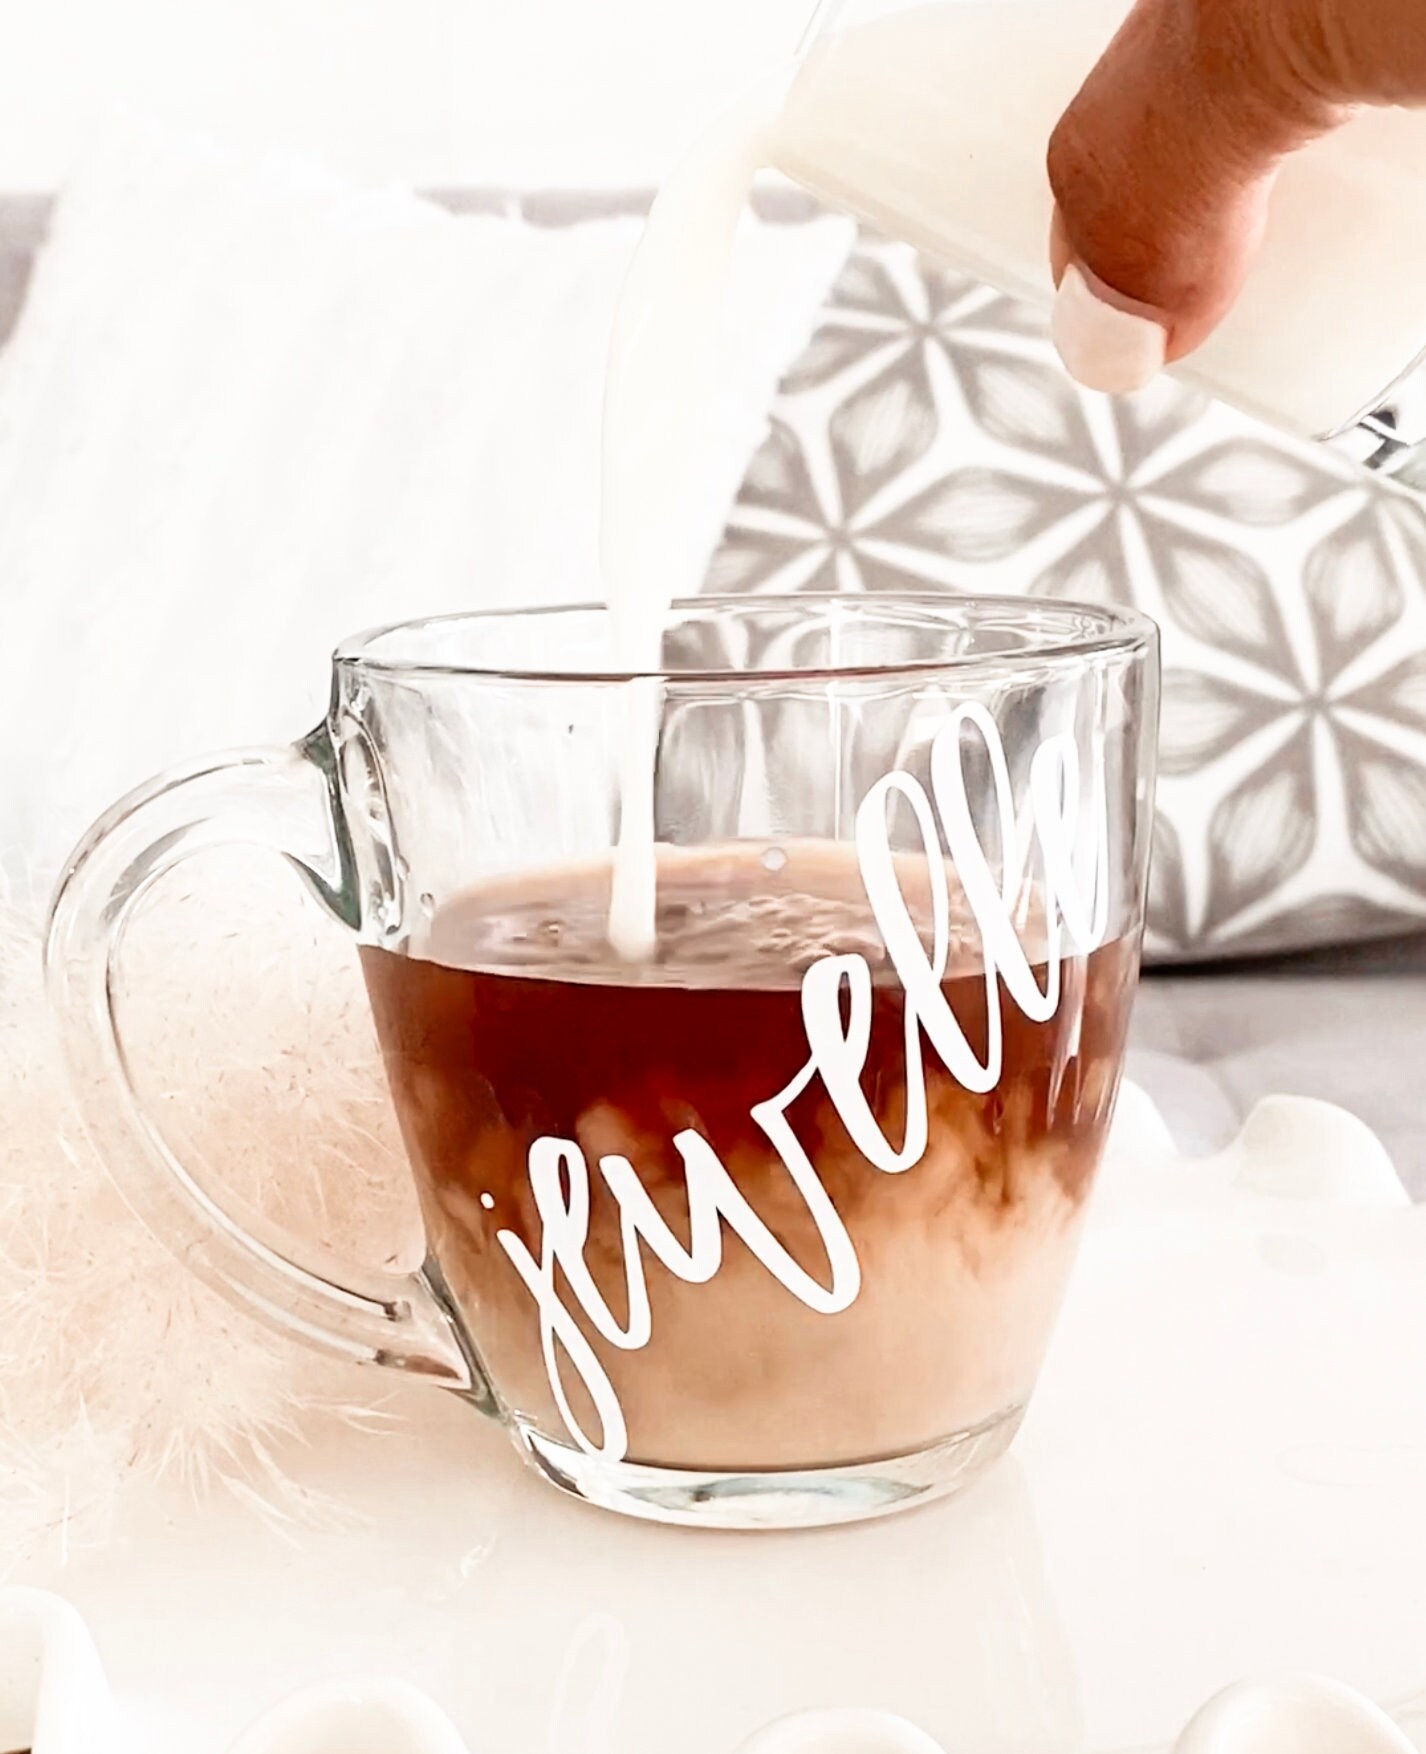 Glass Mug Personalized Glass Coffee Mugs Fall Mug Holiday Mugs Holiday  Gifts for Friends Personalized Gifts for Coworkers EB3289P 